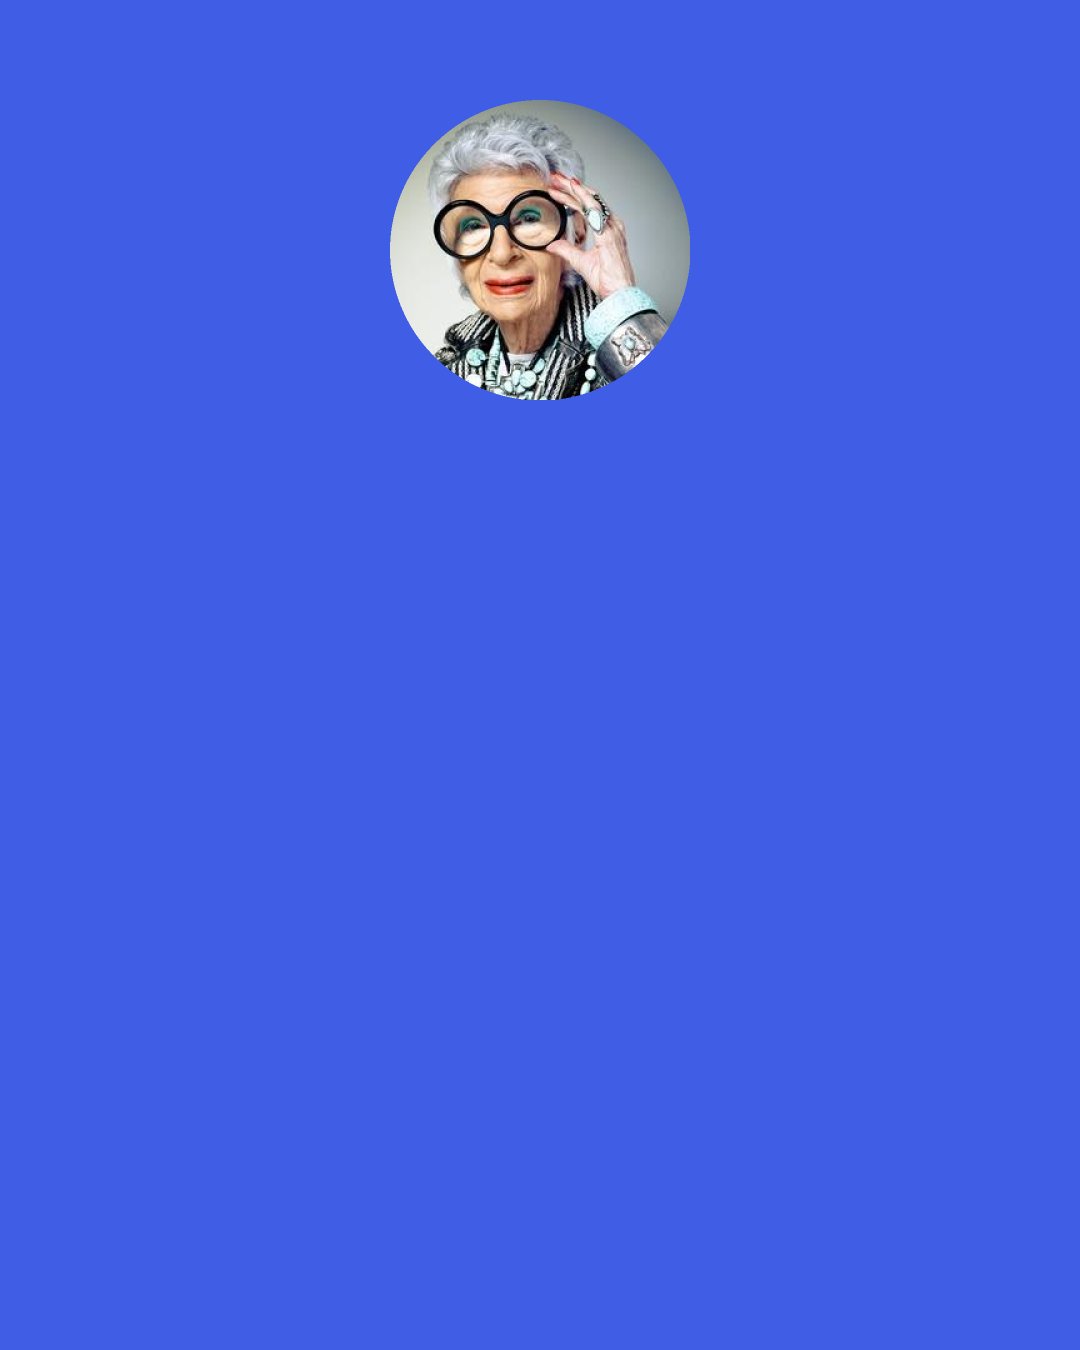 Iris Apfel: I’m a great believer in common sense, and the older I get I see that common sense is not that common